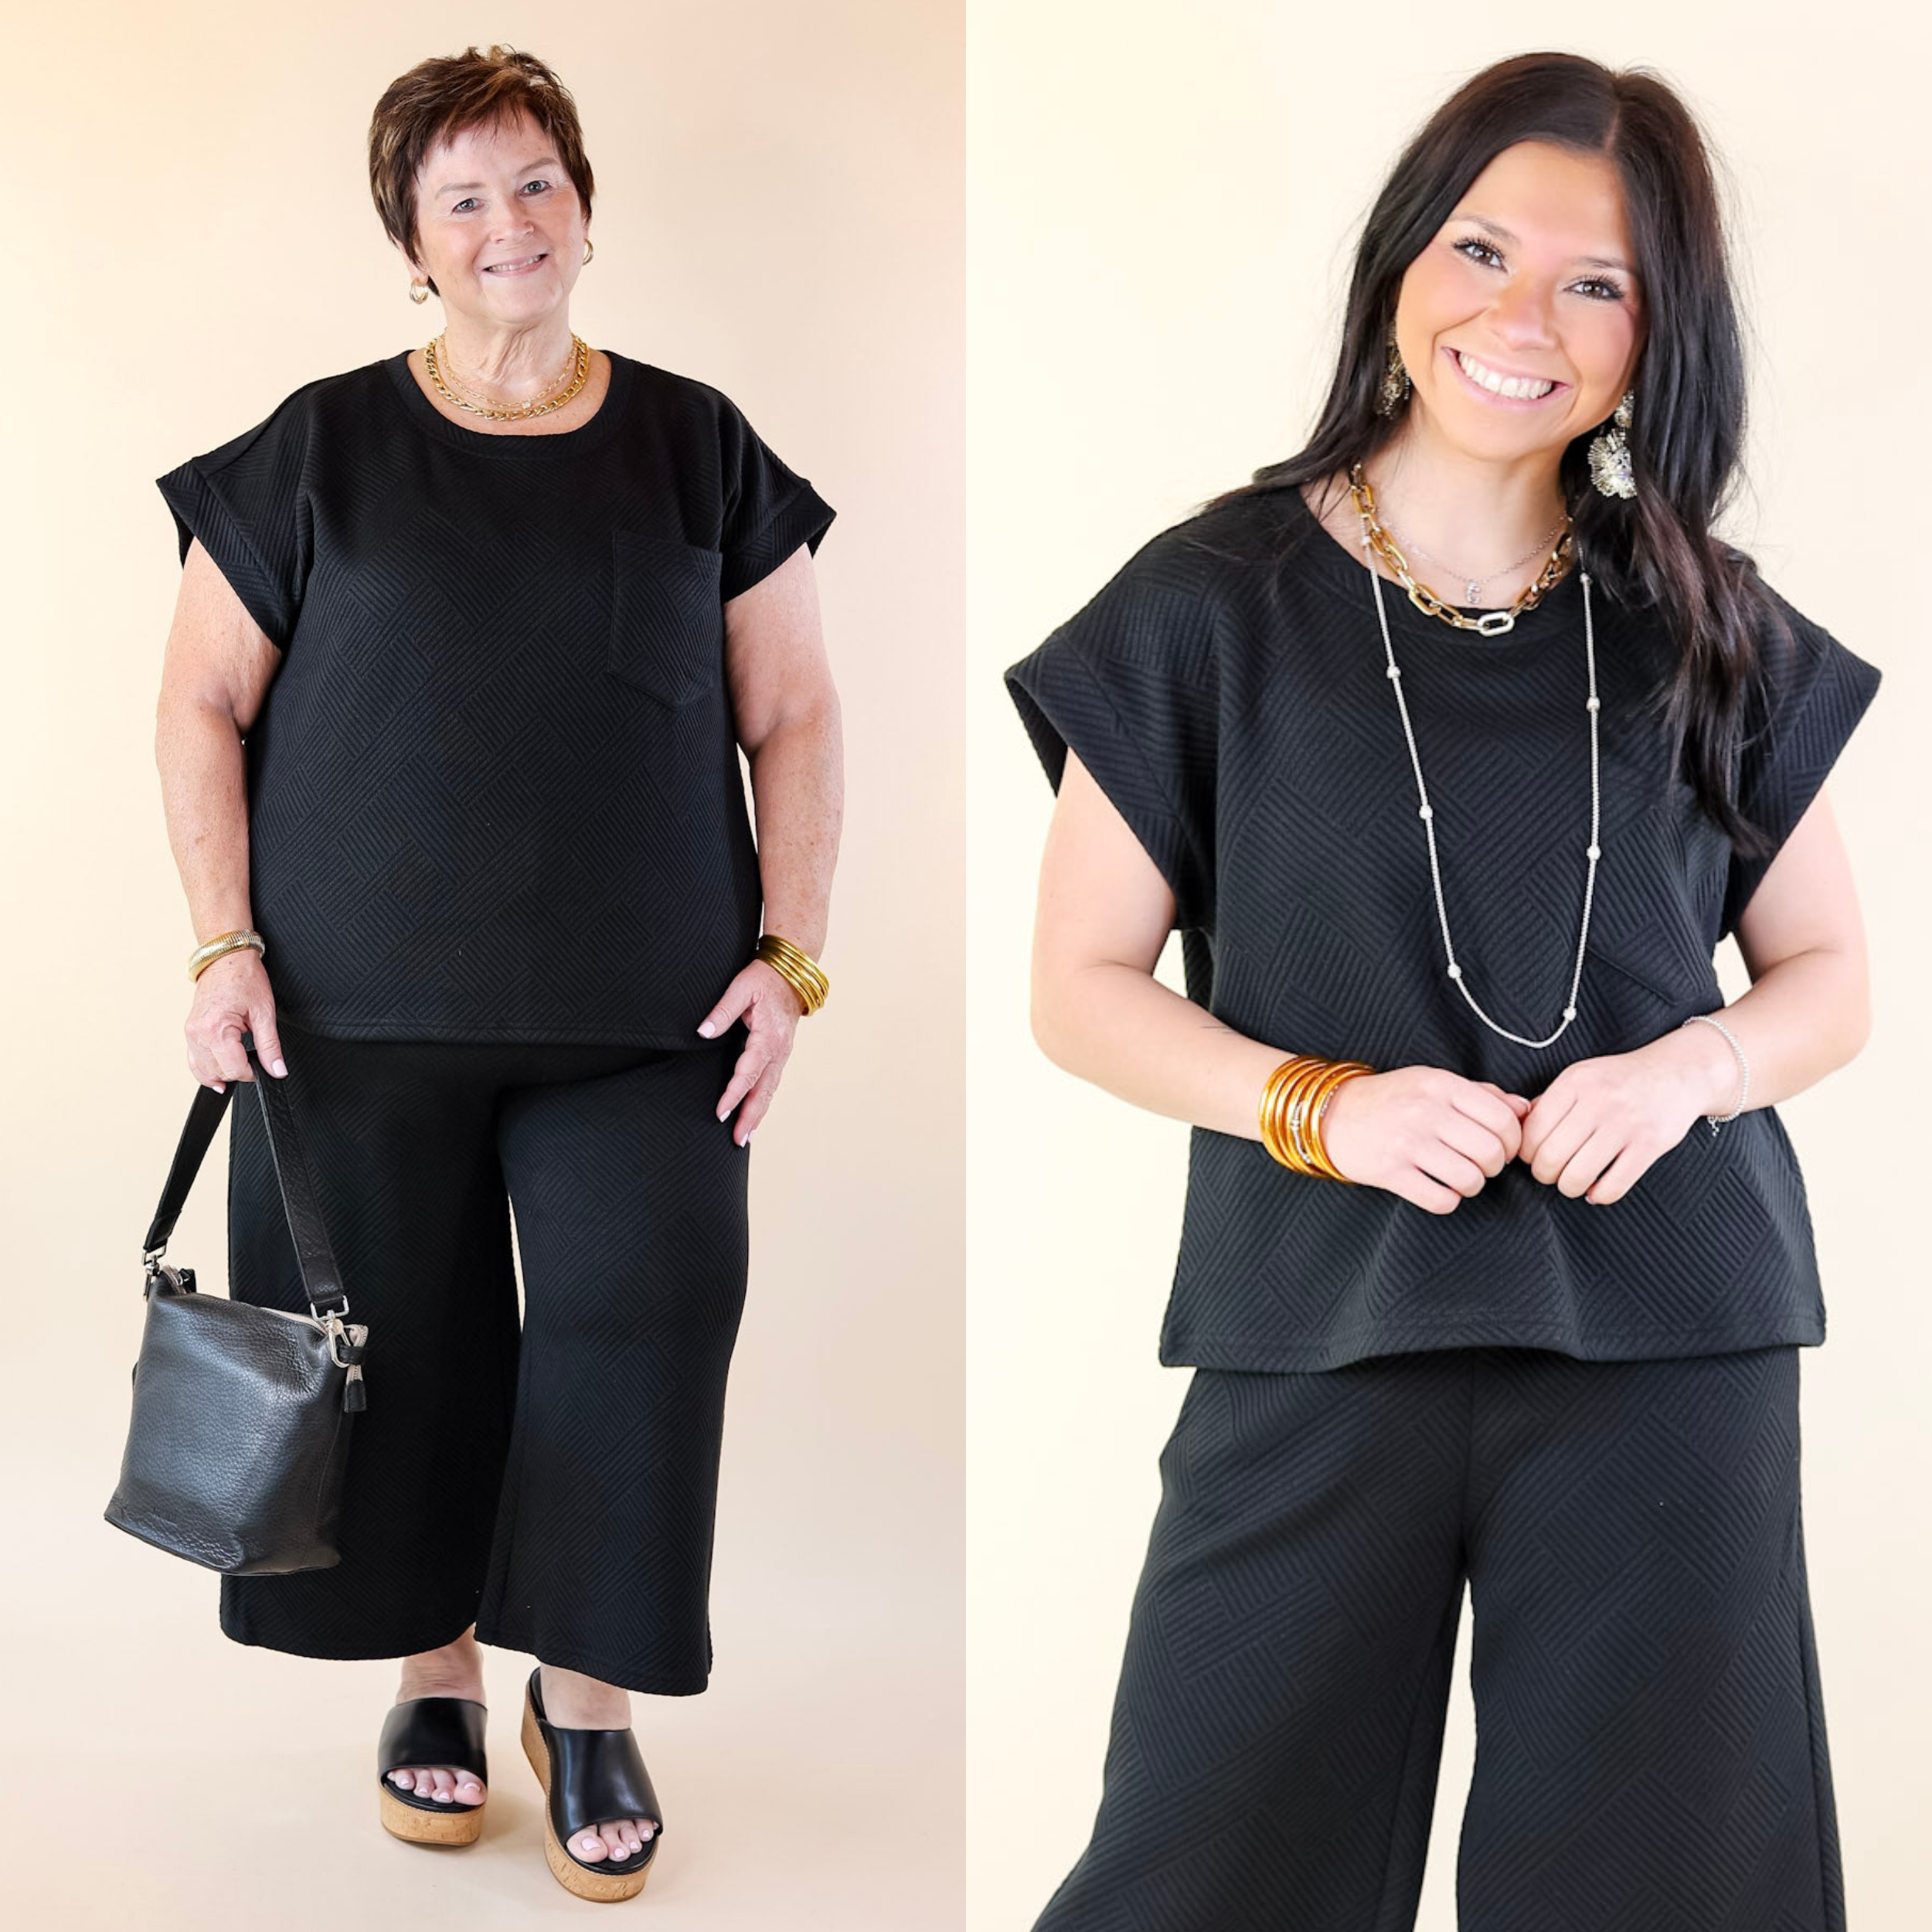 Glamour on the Go Textured Top with Pocket in Black - Giddy Up Glamour Boutique